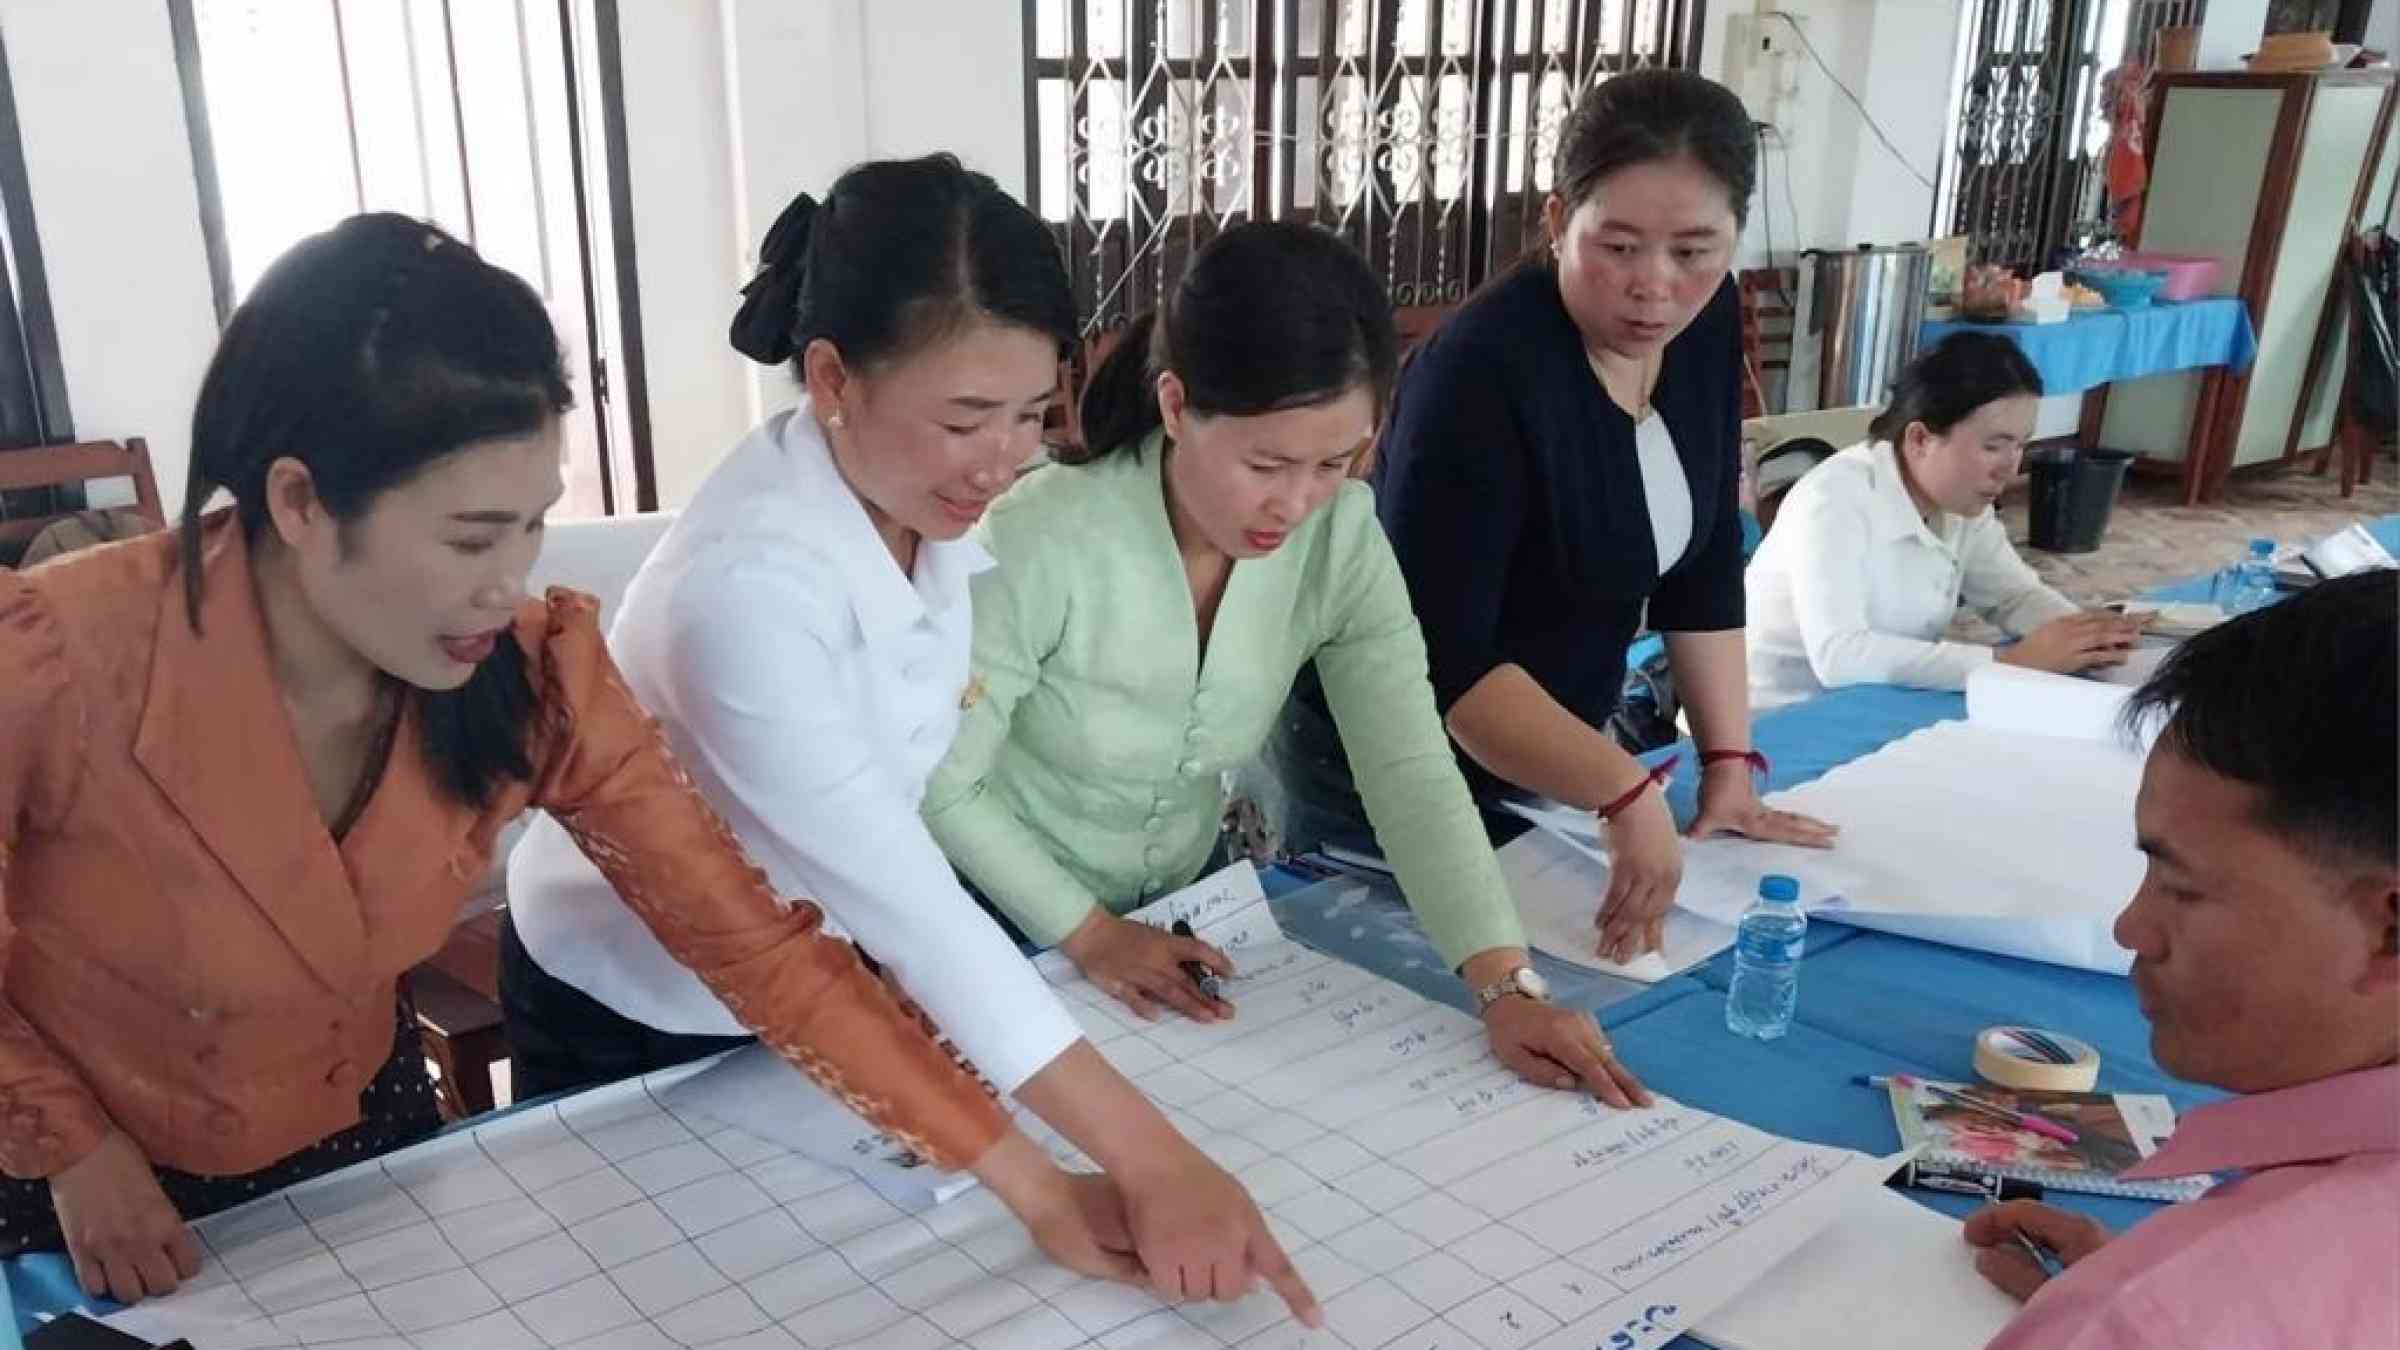 Women conduct a disaster risk assessment in a rural village in Lao PDR.